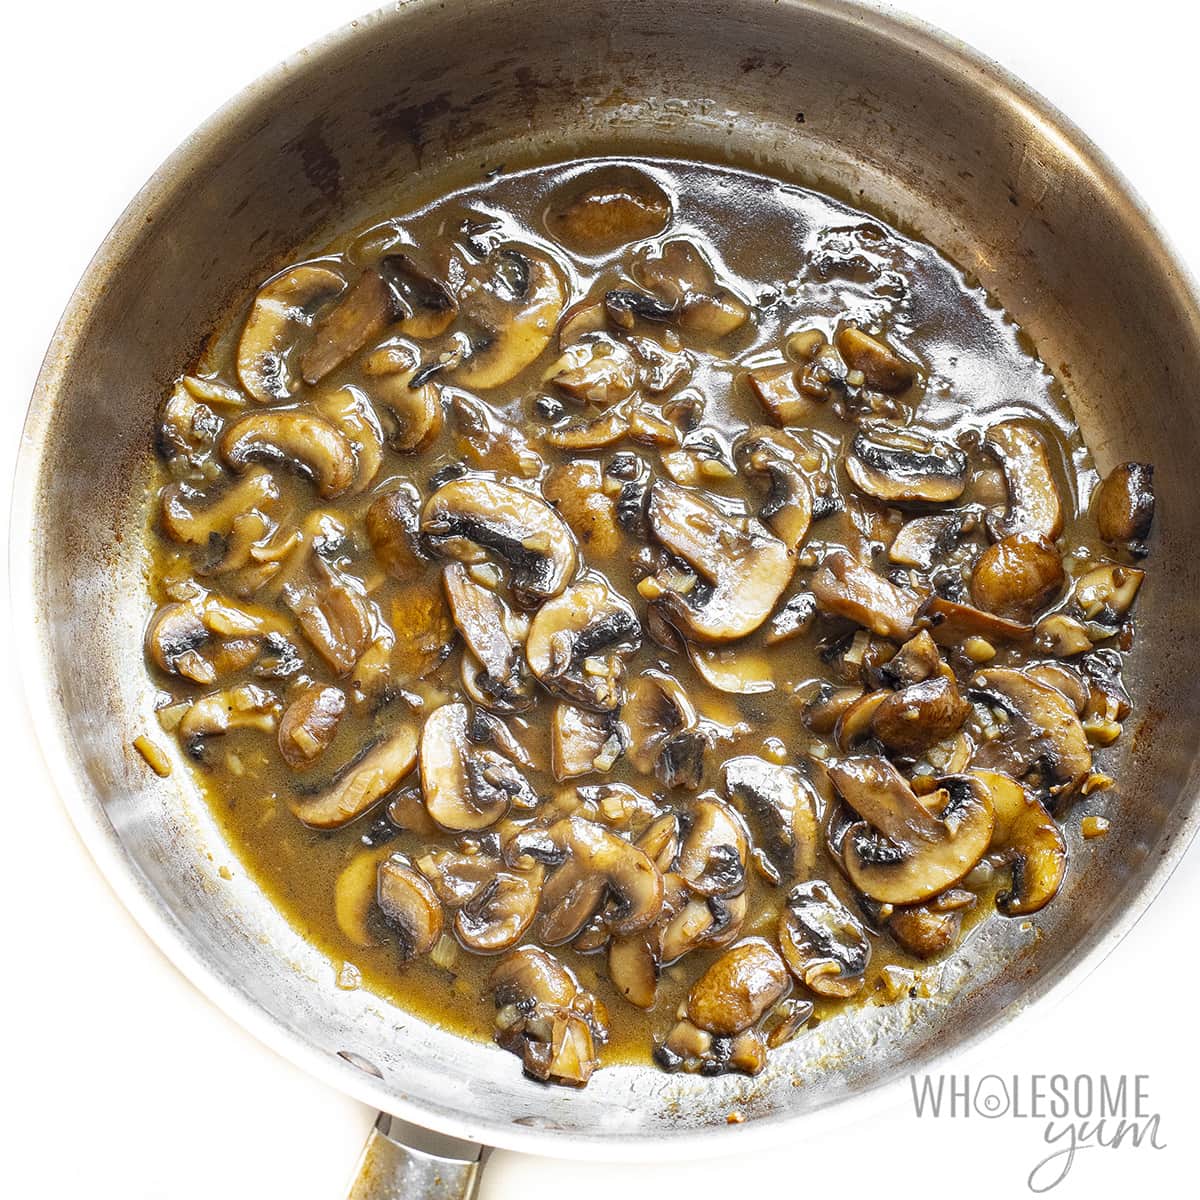 Mushrooms with broth and wine added.